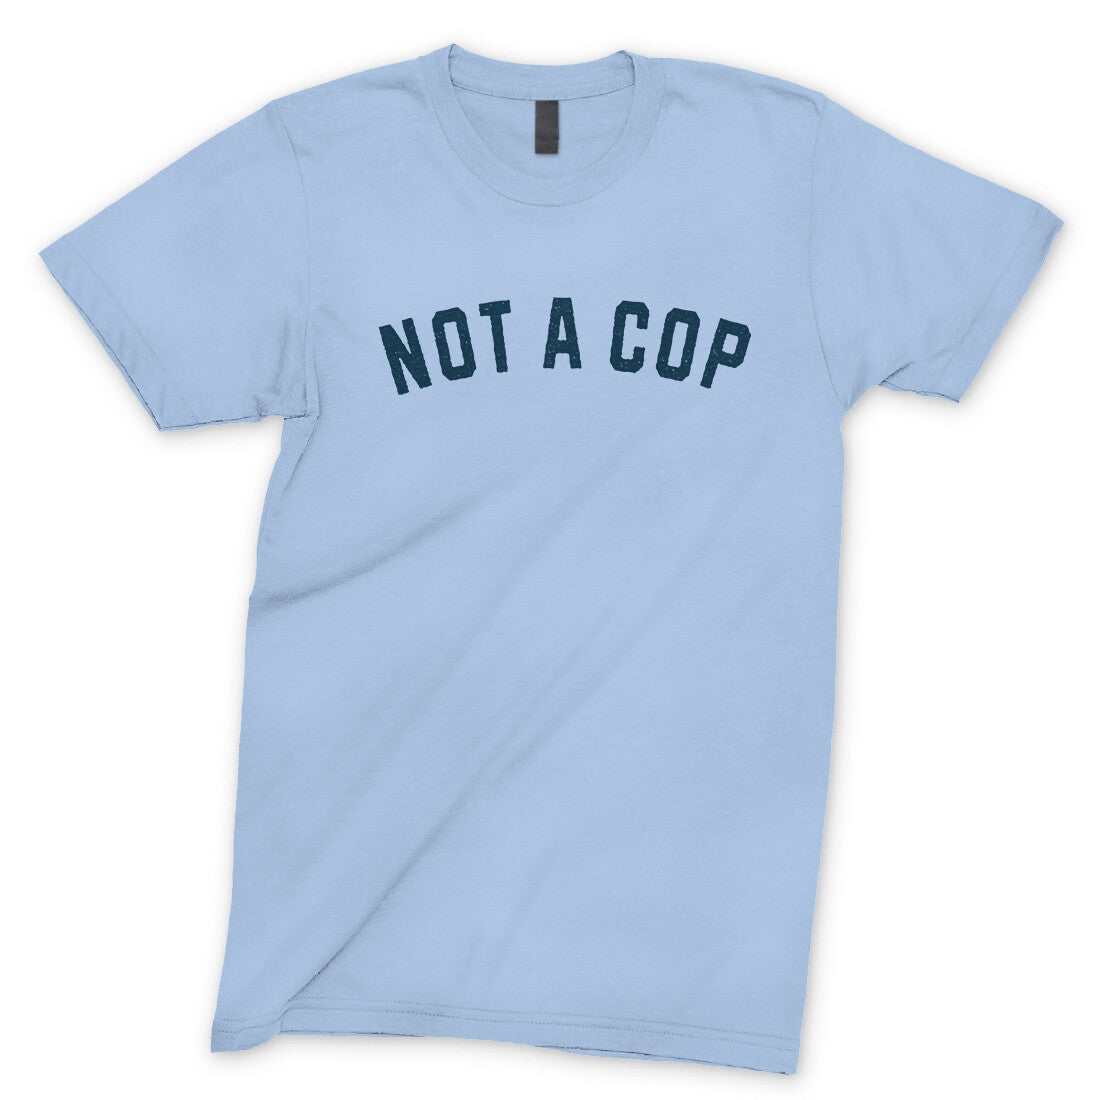 Not a Cop in Light Blue Color